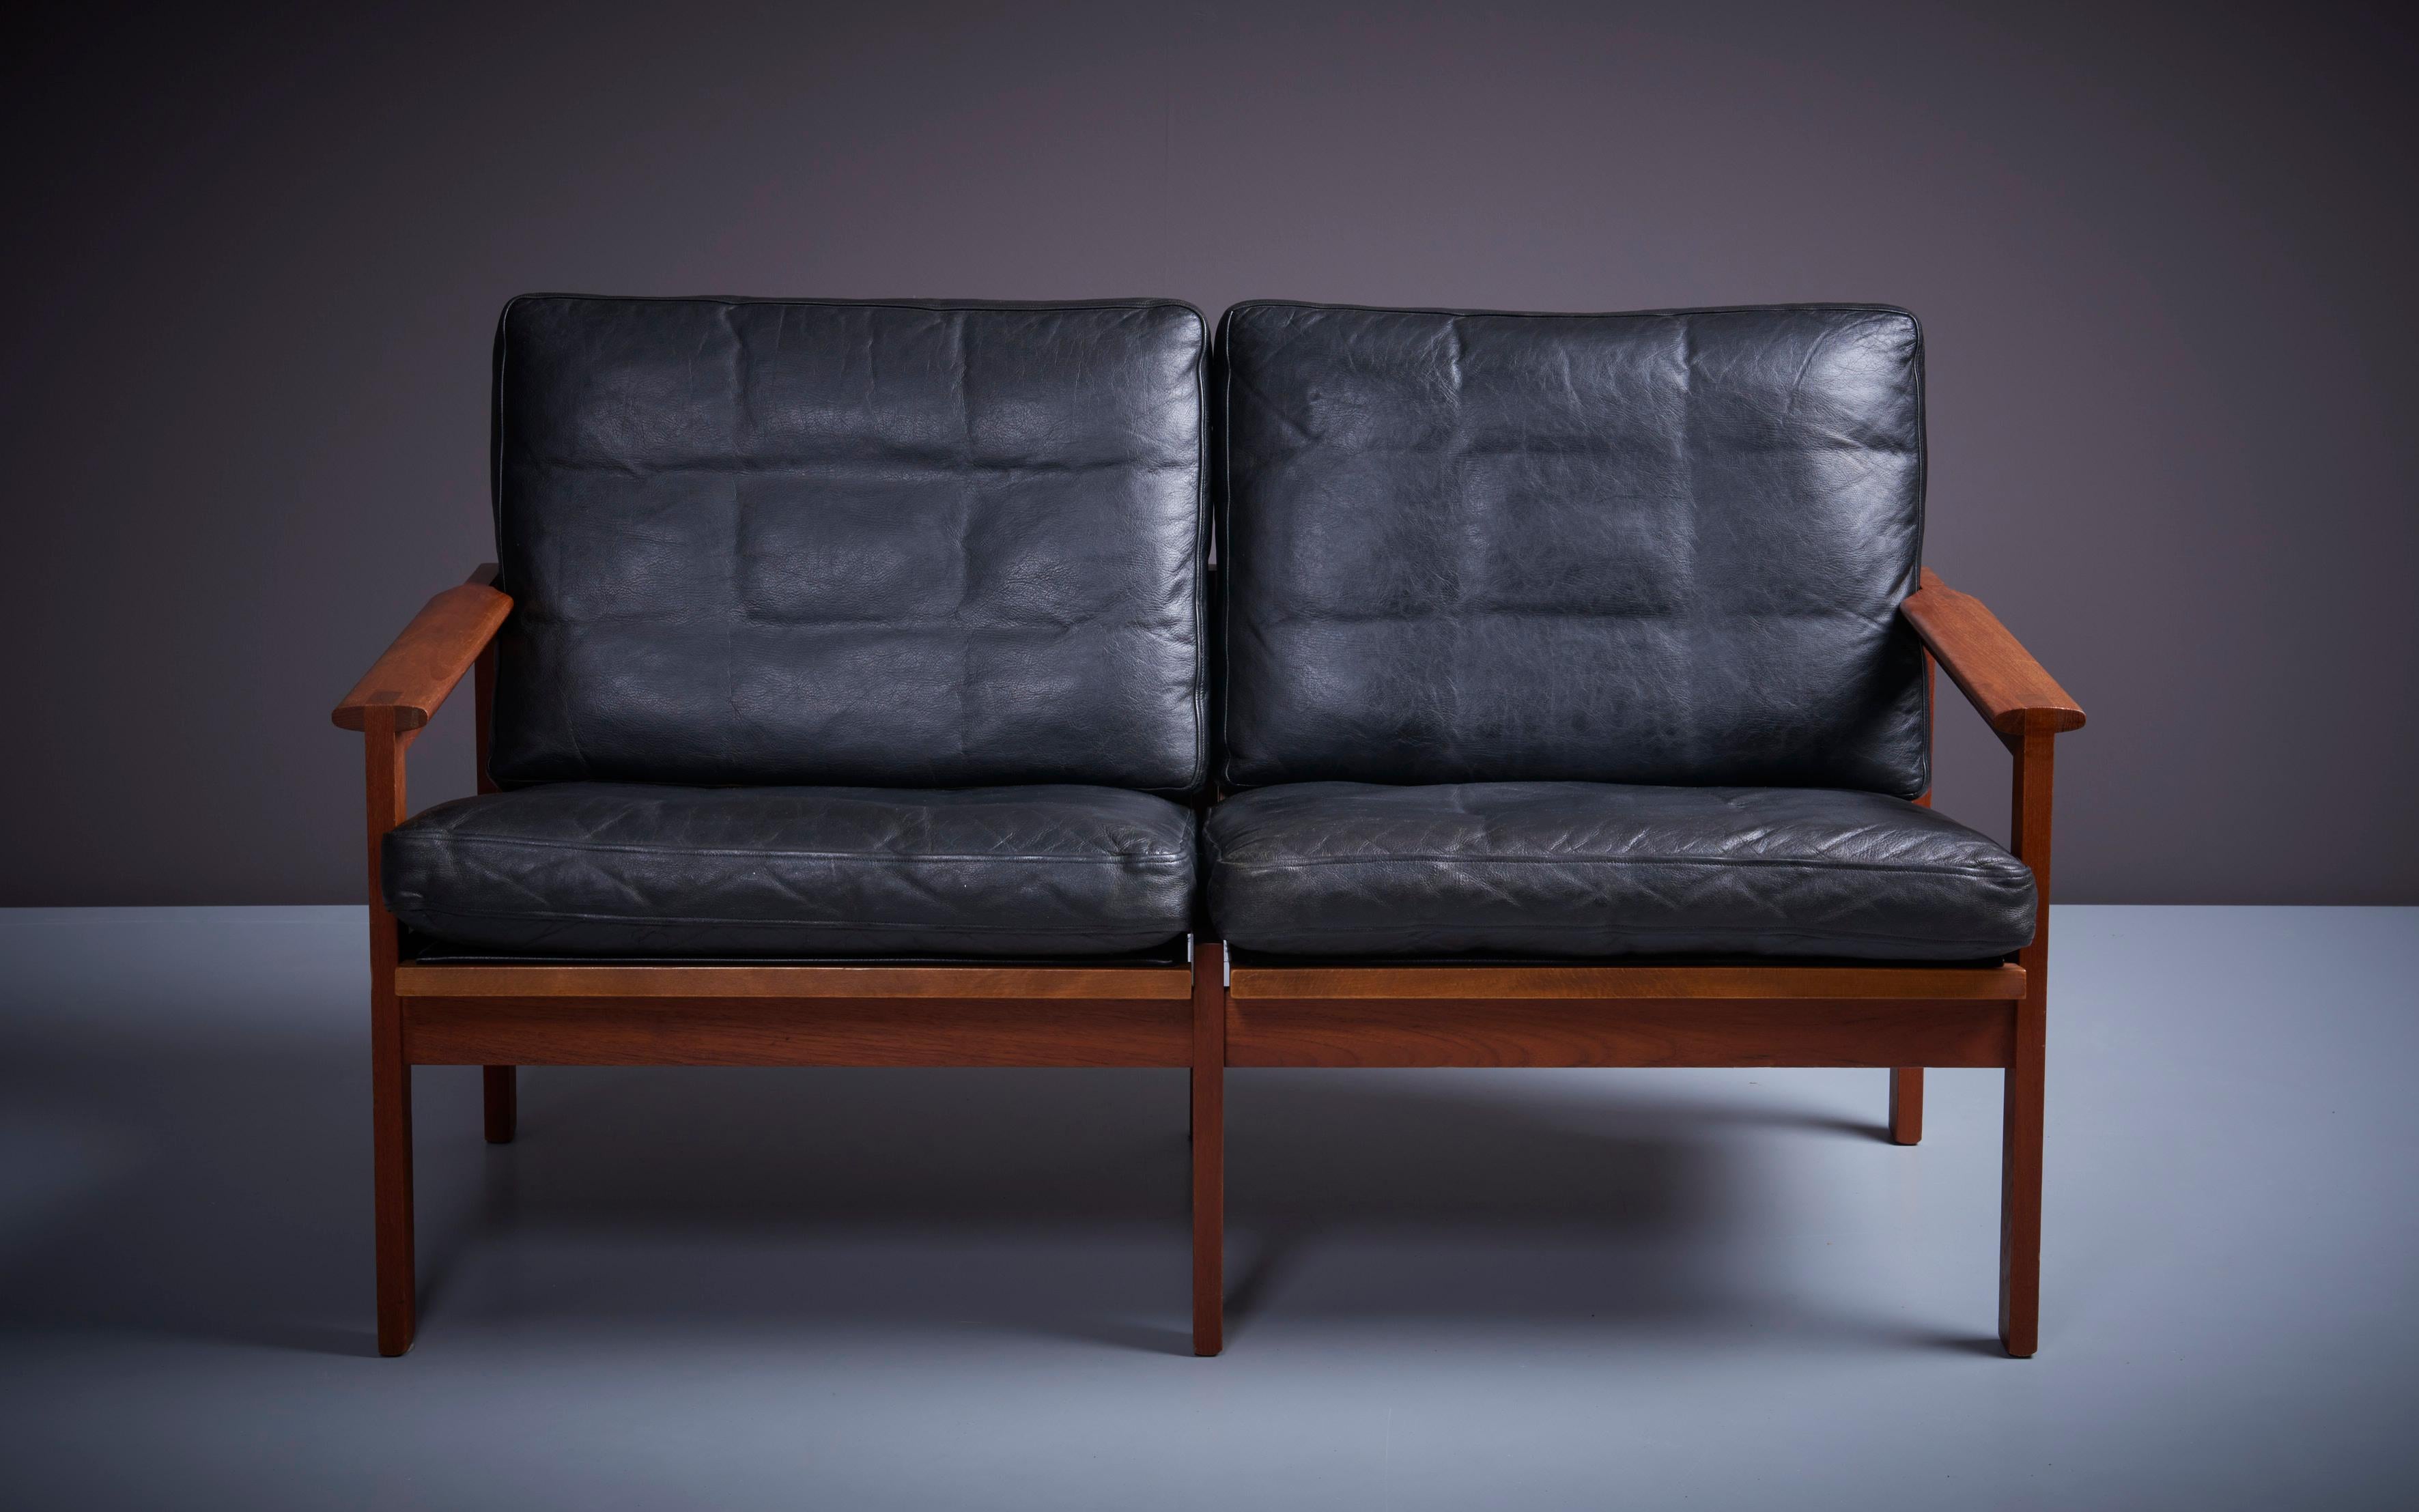 Illum Wikkelso 'Capella' Set of 2x Black Leather Sofa & Side Table Denmark 1960s For Sale 5